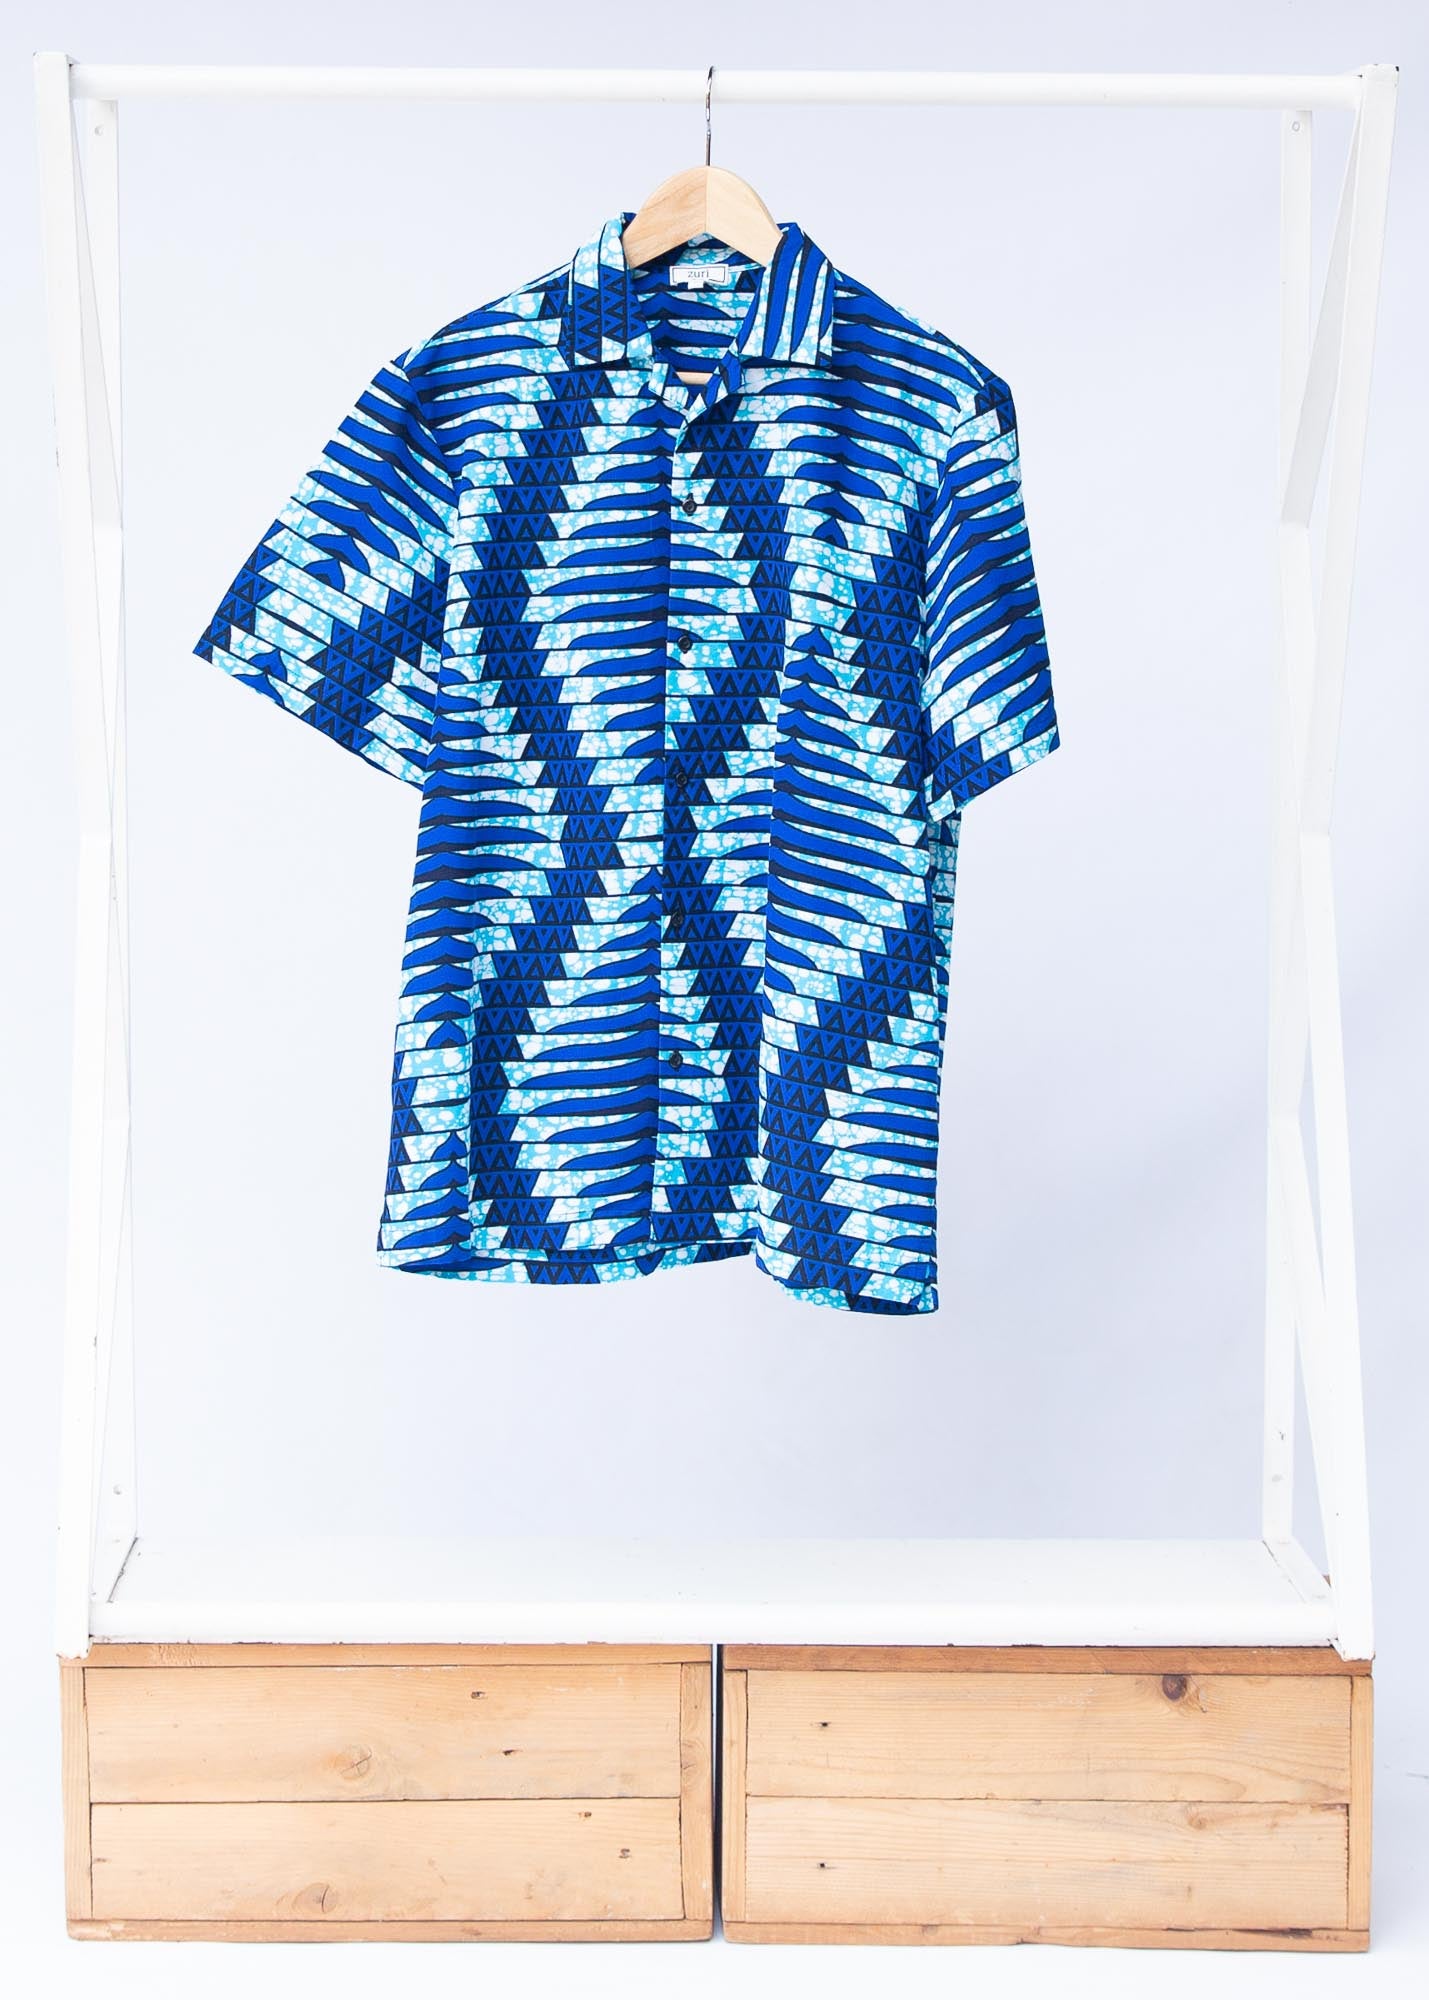 Display of blue, sky blue and white colored men's shirt